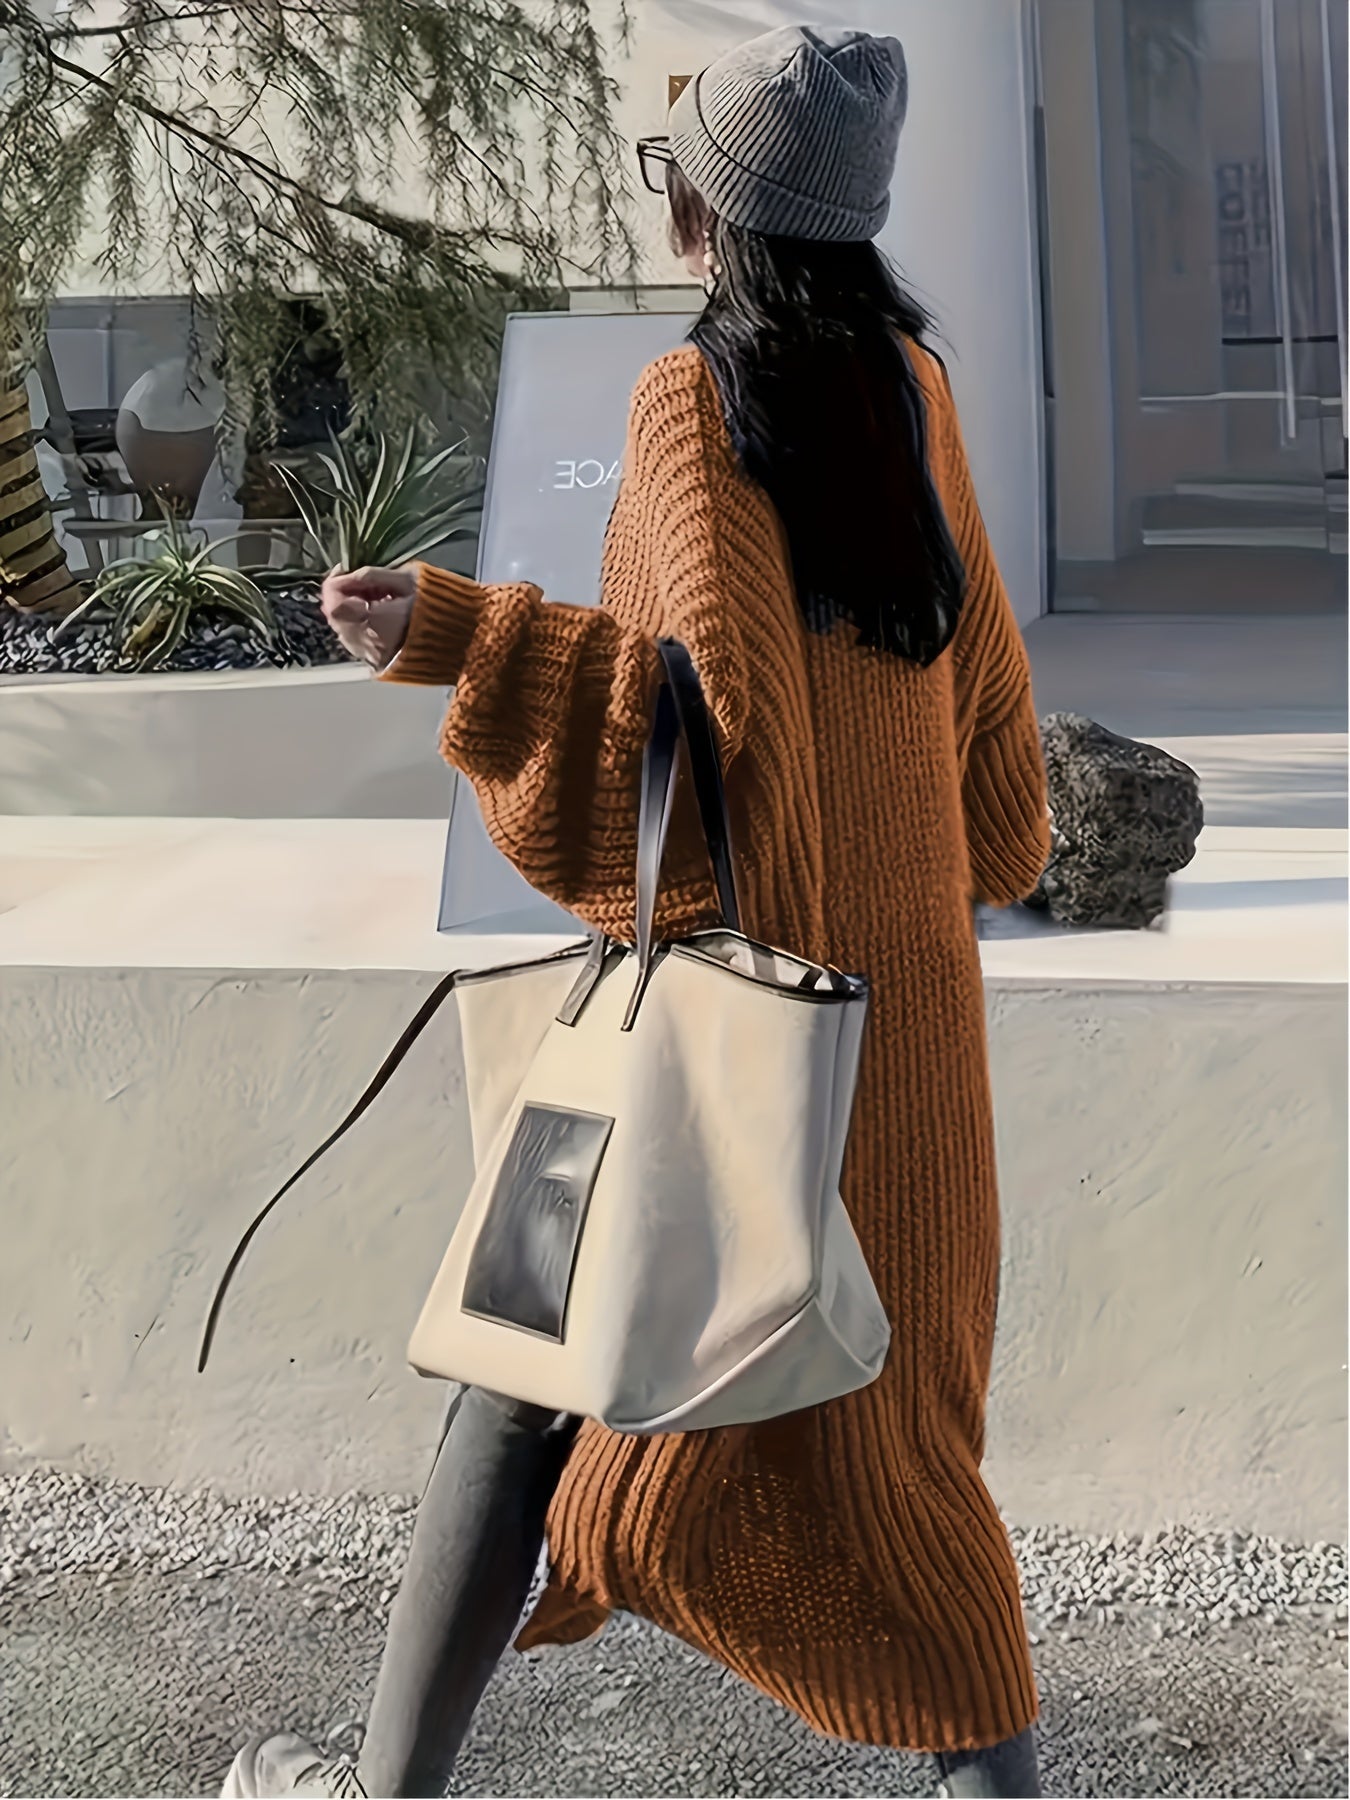 A person wearing a long orange Maramalive™ Plus Size Open Front Loose Knit Cardigan, Casual Long Sleeve Long Length Cardigan With Pocket, gray beanie, and glasses walks outdoors carrying a large cream-colored tote bag.